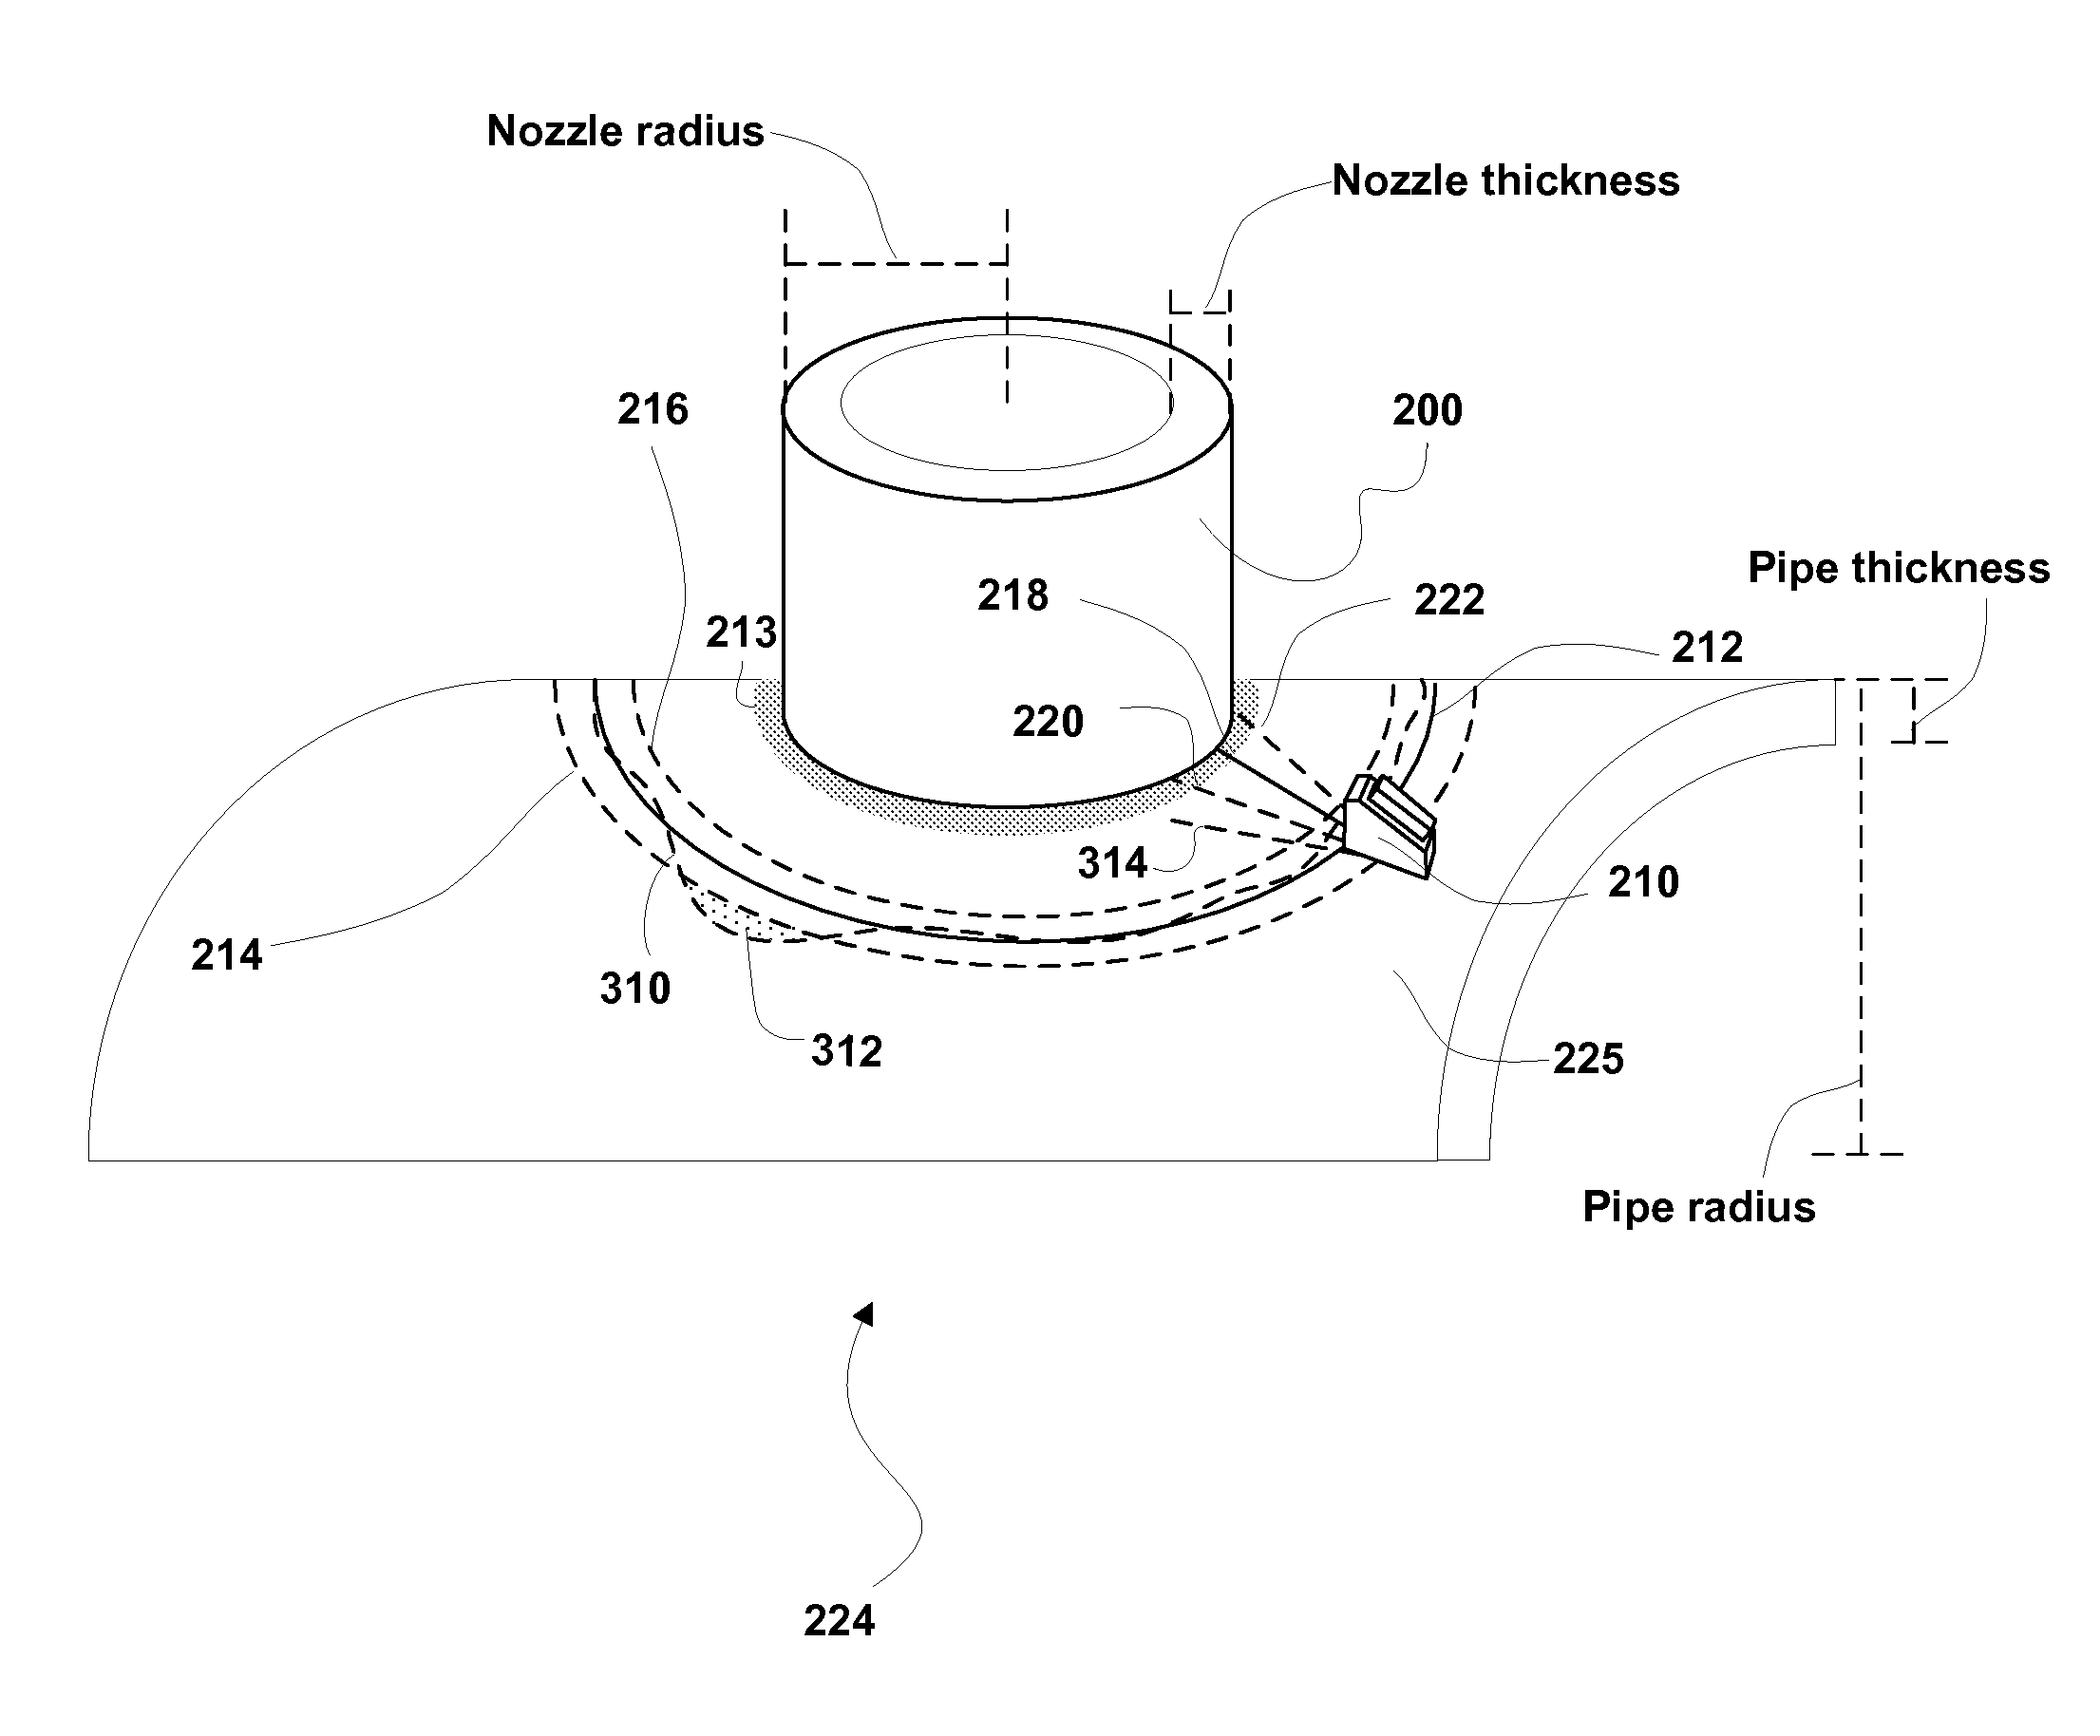 System and method of non-destructive inspection with a visual scanning guide